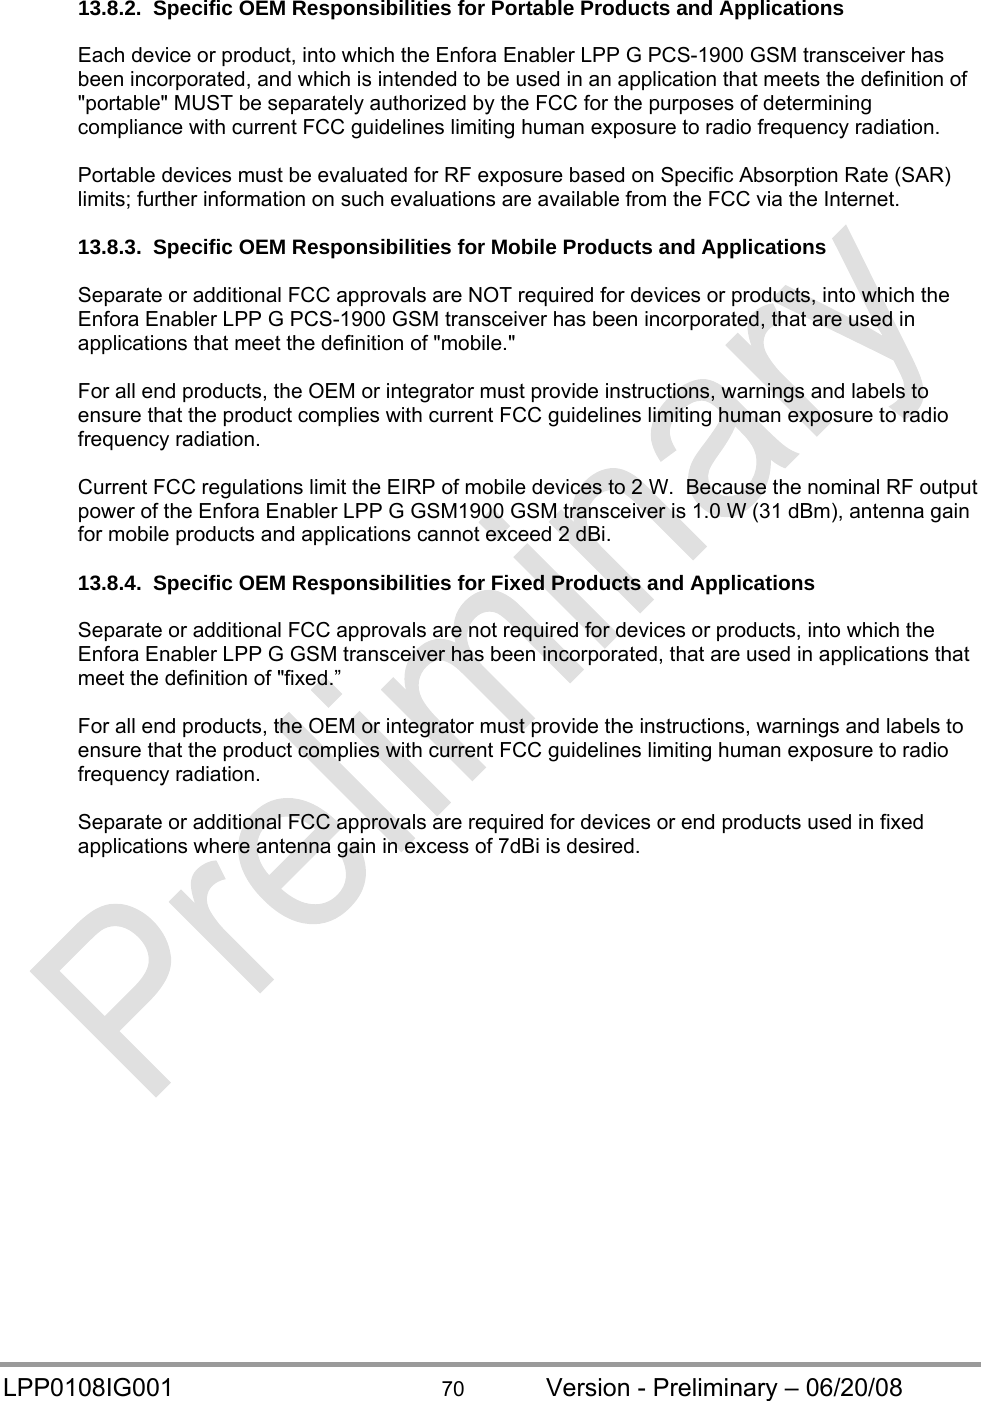  LPP0108IG001  70  Version - Preliminary – 06/20/08 13.8.2.  Specific OEM Responsibilities for Portable Products and Applications  Each device or product, into which the Enfora Enabler LPP G PCS-1900 GSM transceiver has been incorporated, and which is intended to be used in an application that meets the definition of &quot;portable&quot; MUST be separately authorized by the FCC for the purposes of determining compliance with current FCC guidelines limiting human exposure to radio frequency radiation.  Portable devices must be evaluated for RF exposure based on Specific Absorption Rate (SAR) limits; further information on such evaluations are available from the FCC via the Internet.  13.8.3.  Specific OEM Responsibilities for Mobile Products and Applications  Separate or additional FCC approvals are NOT required for devices or products, into which the Enfora Enabler LPP G PCS-1900 GSM transceiver has been incorporated, that are used in applications that meet the definition of &quot;mobile.&quot;  For all end products, the OEM or integrator must provide instructions, warnings and labels to ensure that the product complies with current FCC guidelines limiting human exposure to radio frequency radiation.  Current FCC regulations limit the EIRP of mobile devices to 2 W.  Because the nominal RF output power of the Enfora Enabler LPP G GSM1900 GSM transceiver is 1.0 W (31 dBm), antenna gain for mobile products and applications cannot exceed 2 dBi.  13.8.4.  Specific OEM Responsibilities for Fixed Products and Applications  Separate or additional FCC approvals are not required for devices or products, into which the Enfora Enabler LPP G GSM transceiver has been incorporated, that are used in applications that meet the definition of &quot;fixed.”  For all end products, the OEM or integrator must provide the instructions, warnings and labels to ensure that the product complies with current FCC guidelines limiting human exposure to radio frequency radiation.  Separate or additional FCC approvals are required for devices or end products used in fixed applications where antenna gain in excess of 7dBi is desired.   